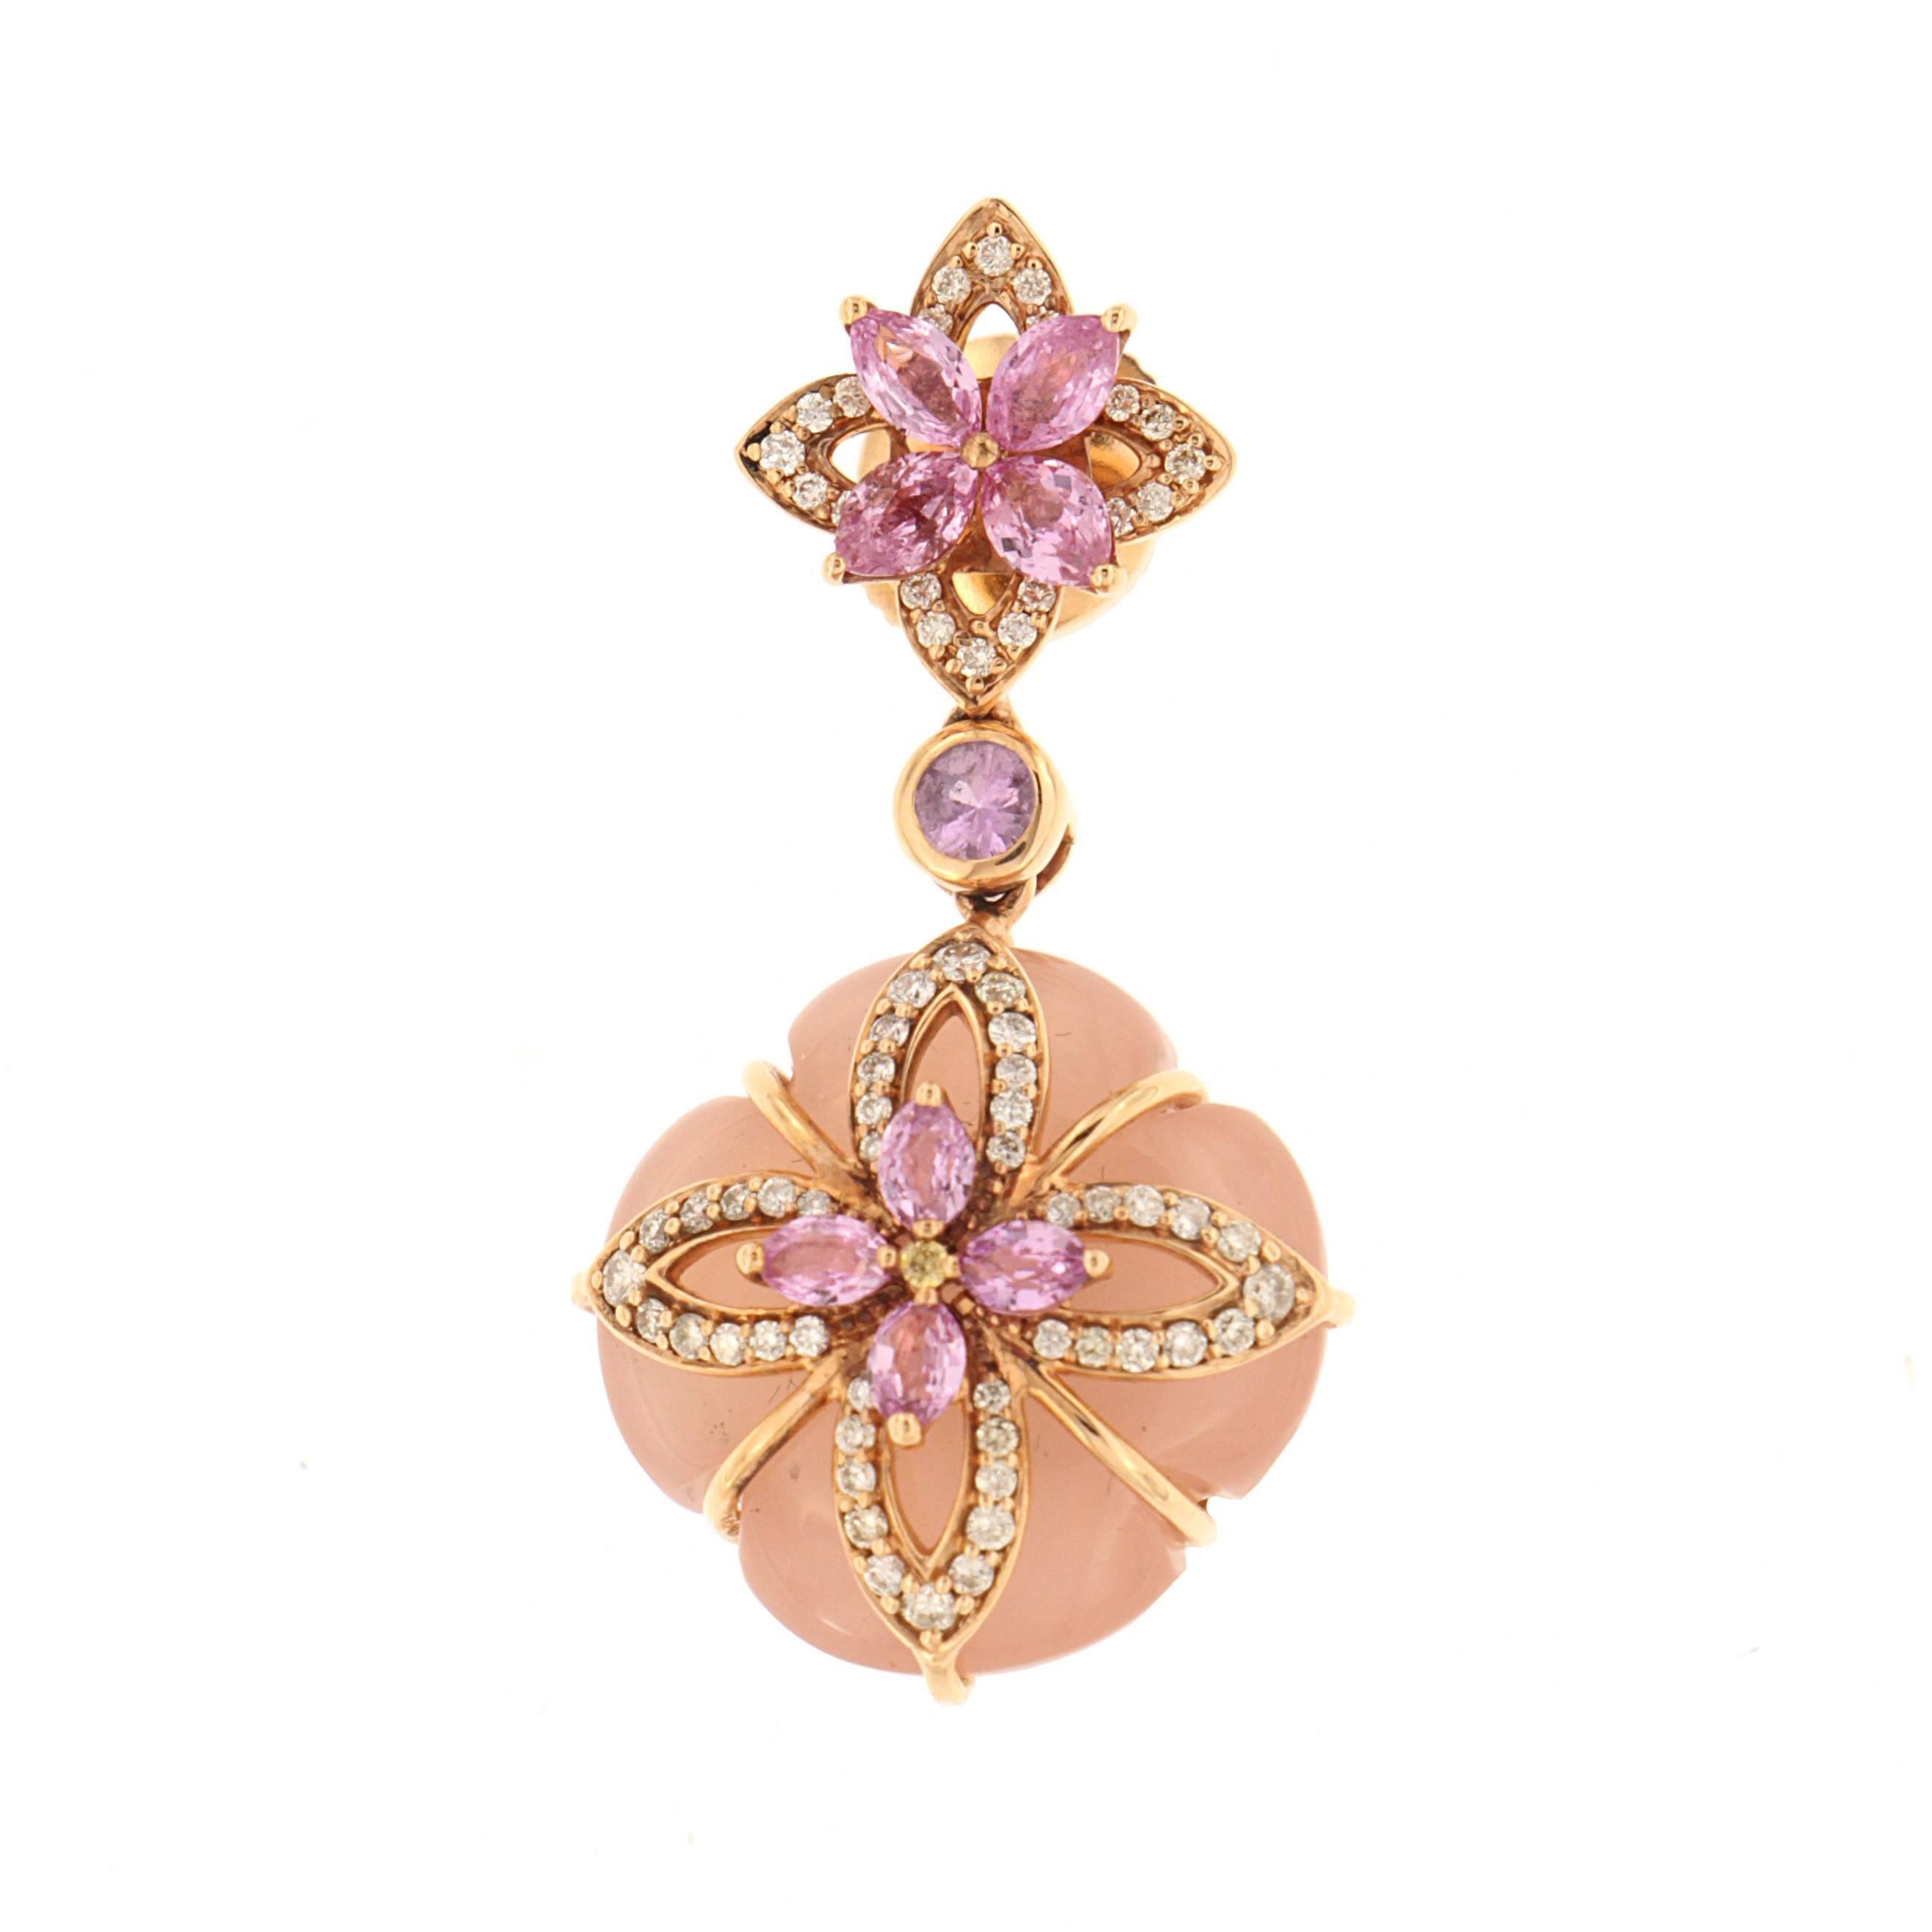 Be the envy of royalty with Zorab's 28.47 Carat Pink chalcedony 28.47 cushion style drop earrings, bow-tied with 0.53 Carats of White Diamonds and 1.96 Carats of pink sapphire 1.96. 

This item has a serial number and bears the stamp of authenticity